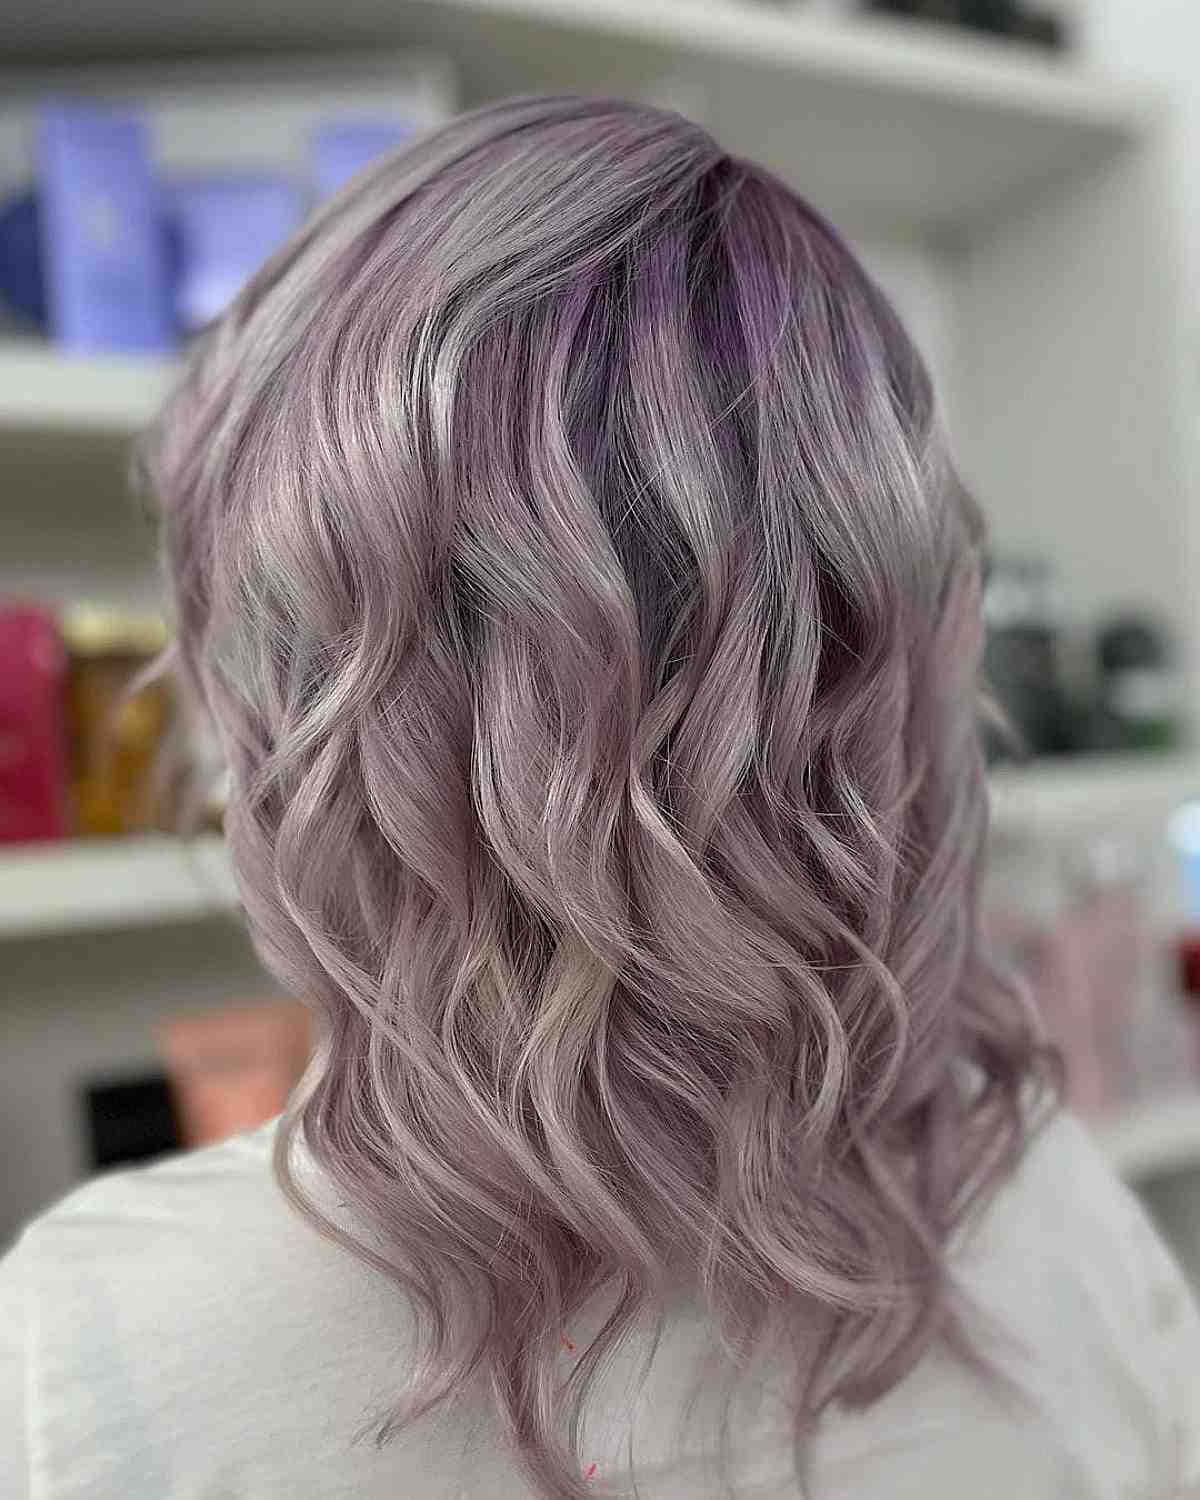 "Vibrant and Soft - Step into the Magical World of Pastels"